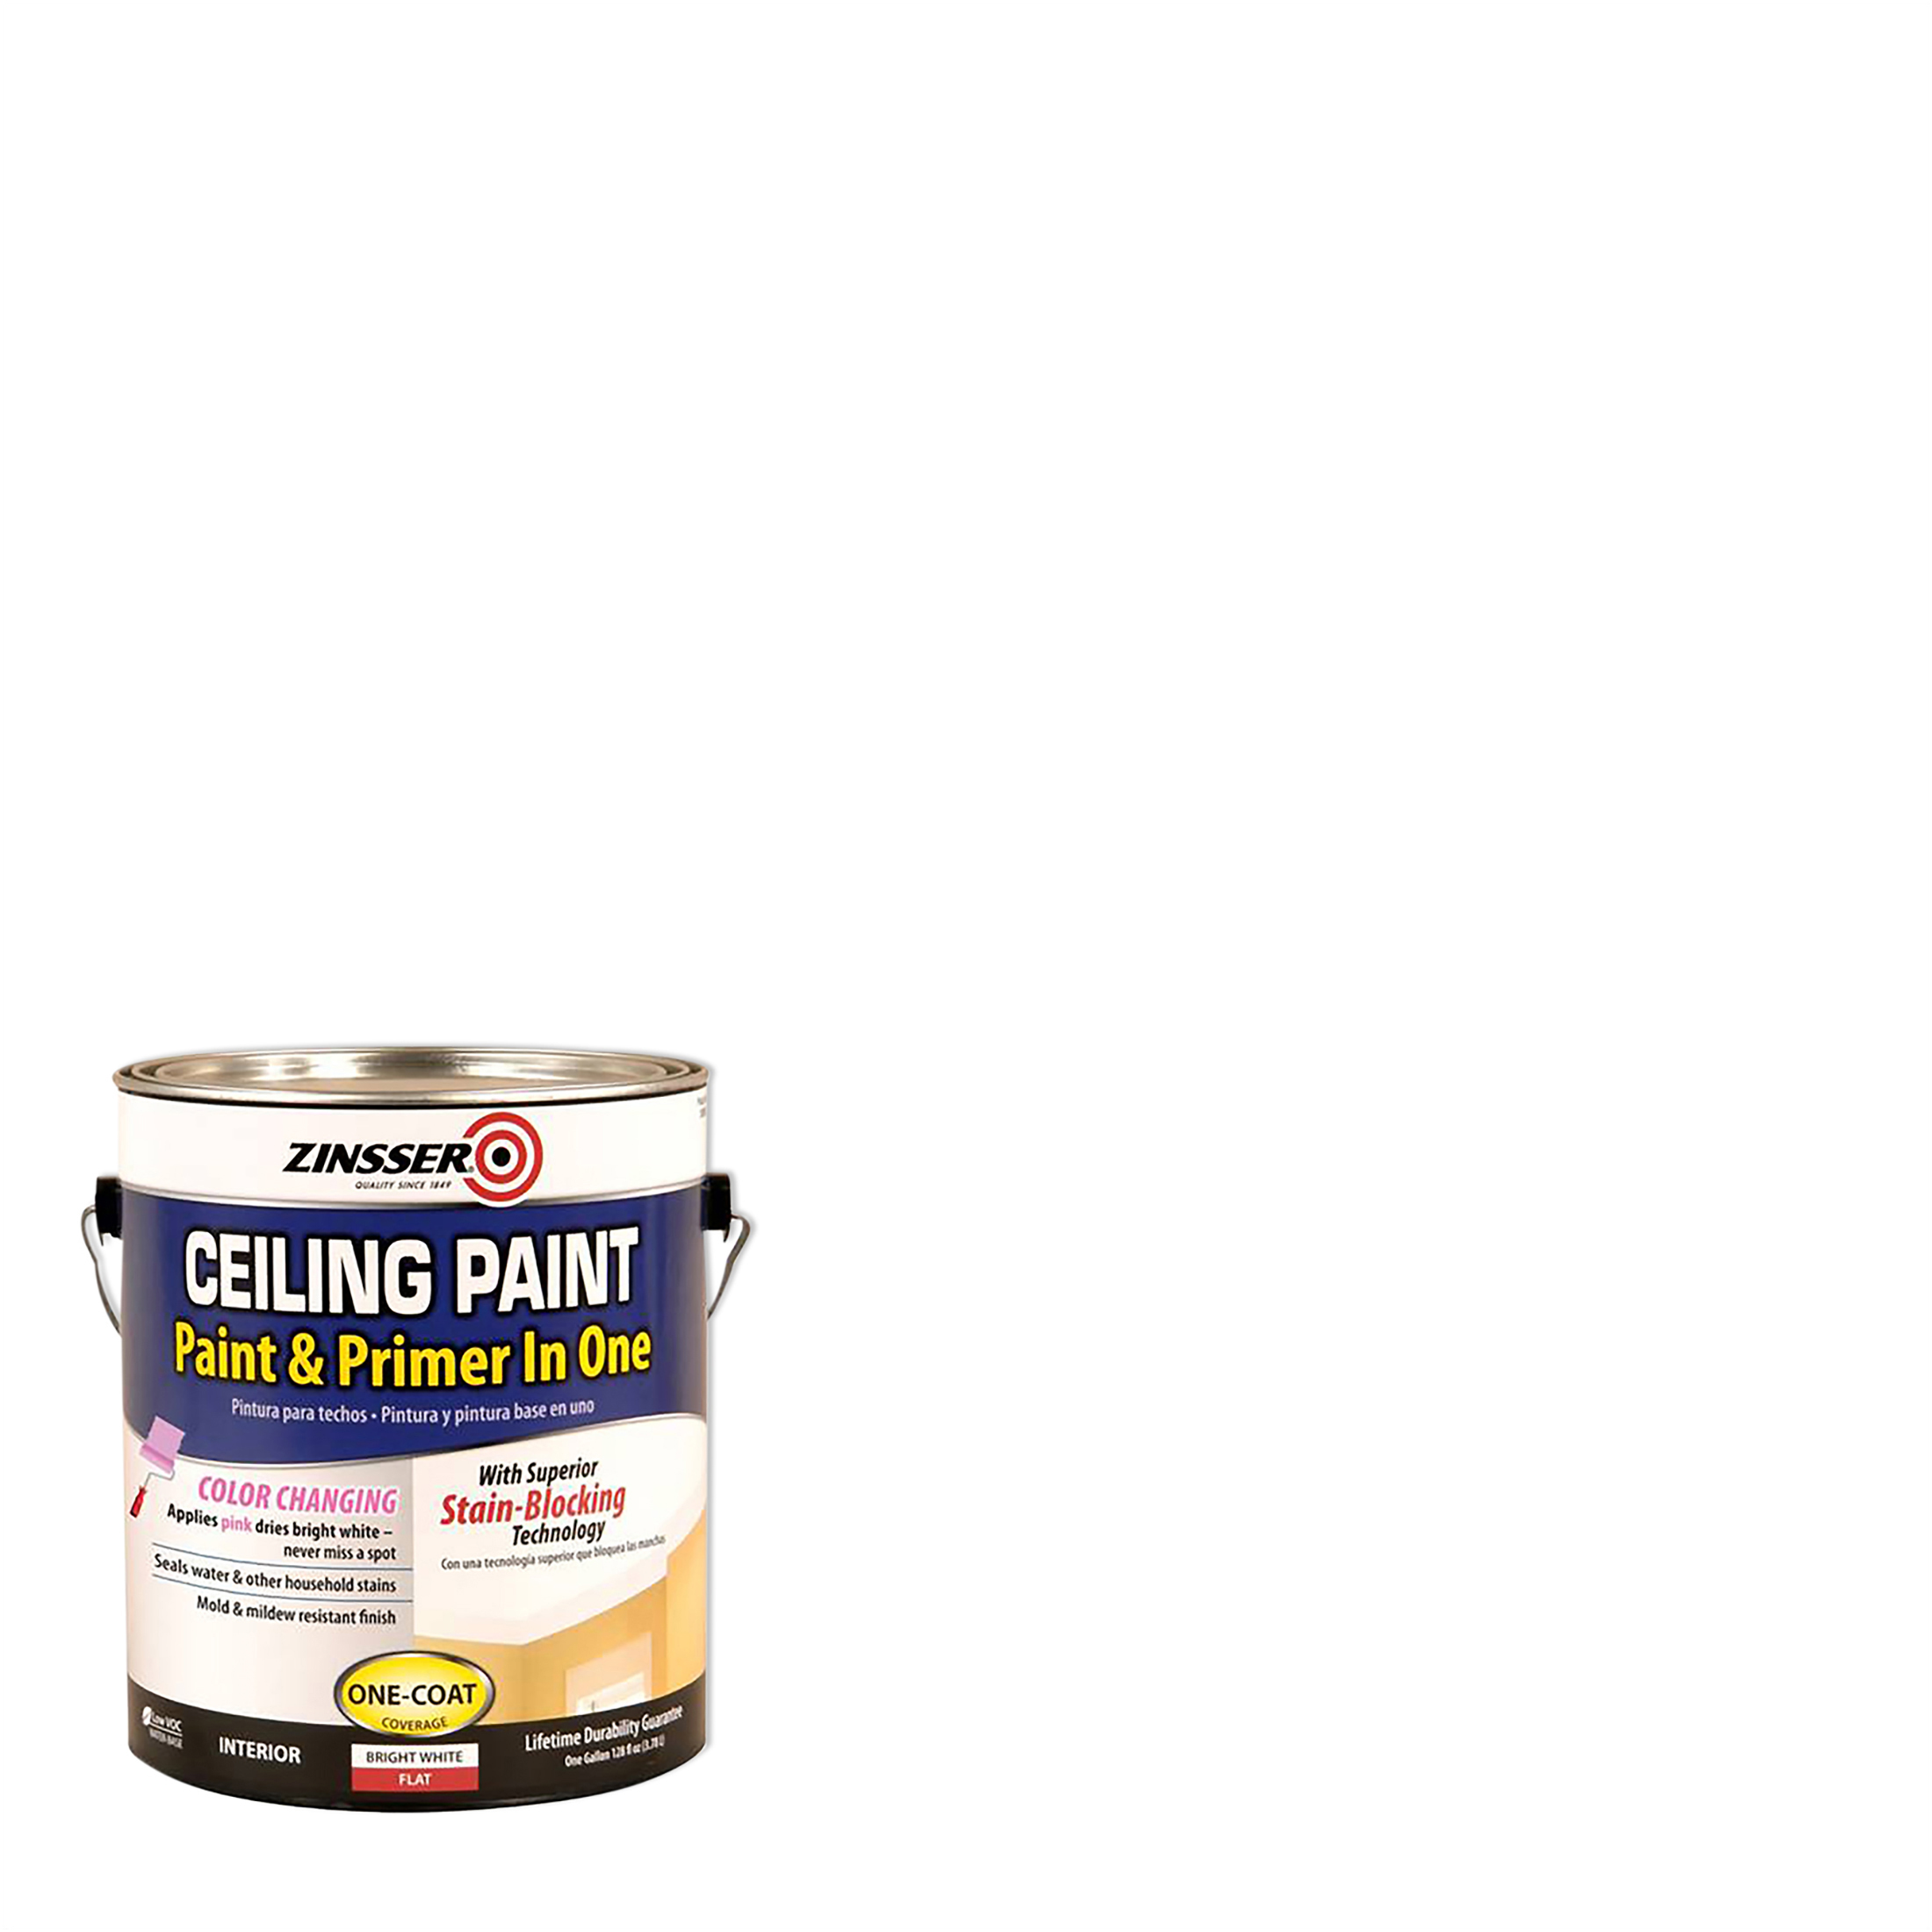 White, Zinsser Flat Ceiling Paint and Primer- Gallon, 2 Pack - image 1 of 6